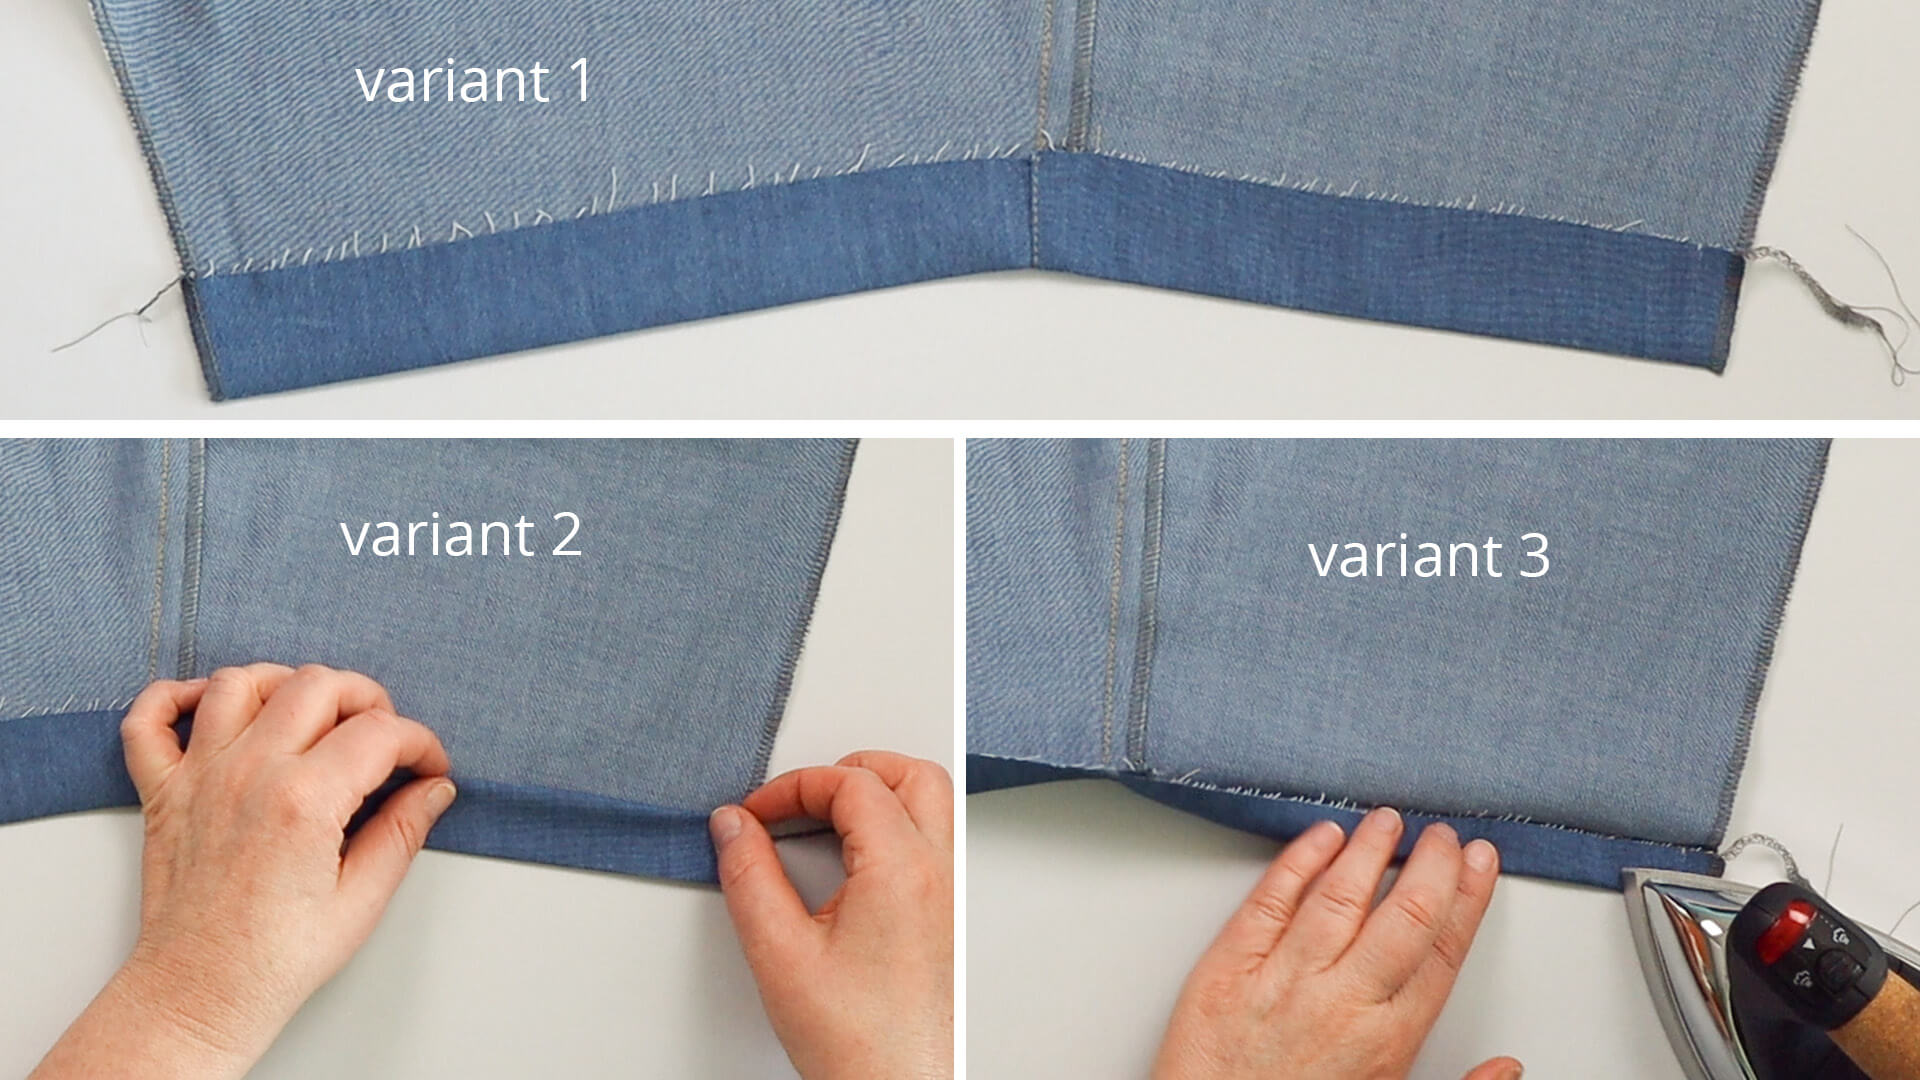 The picture shows processing variants with single and double hem binding.